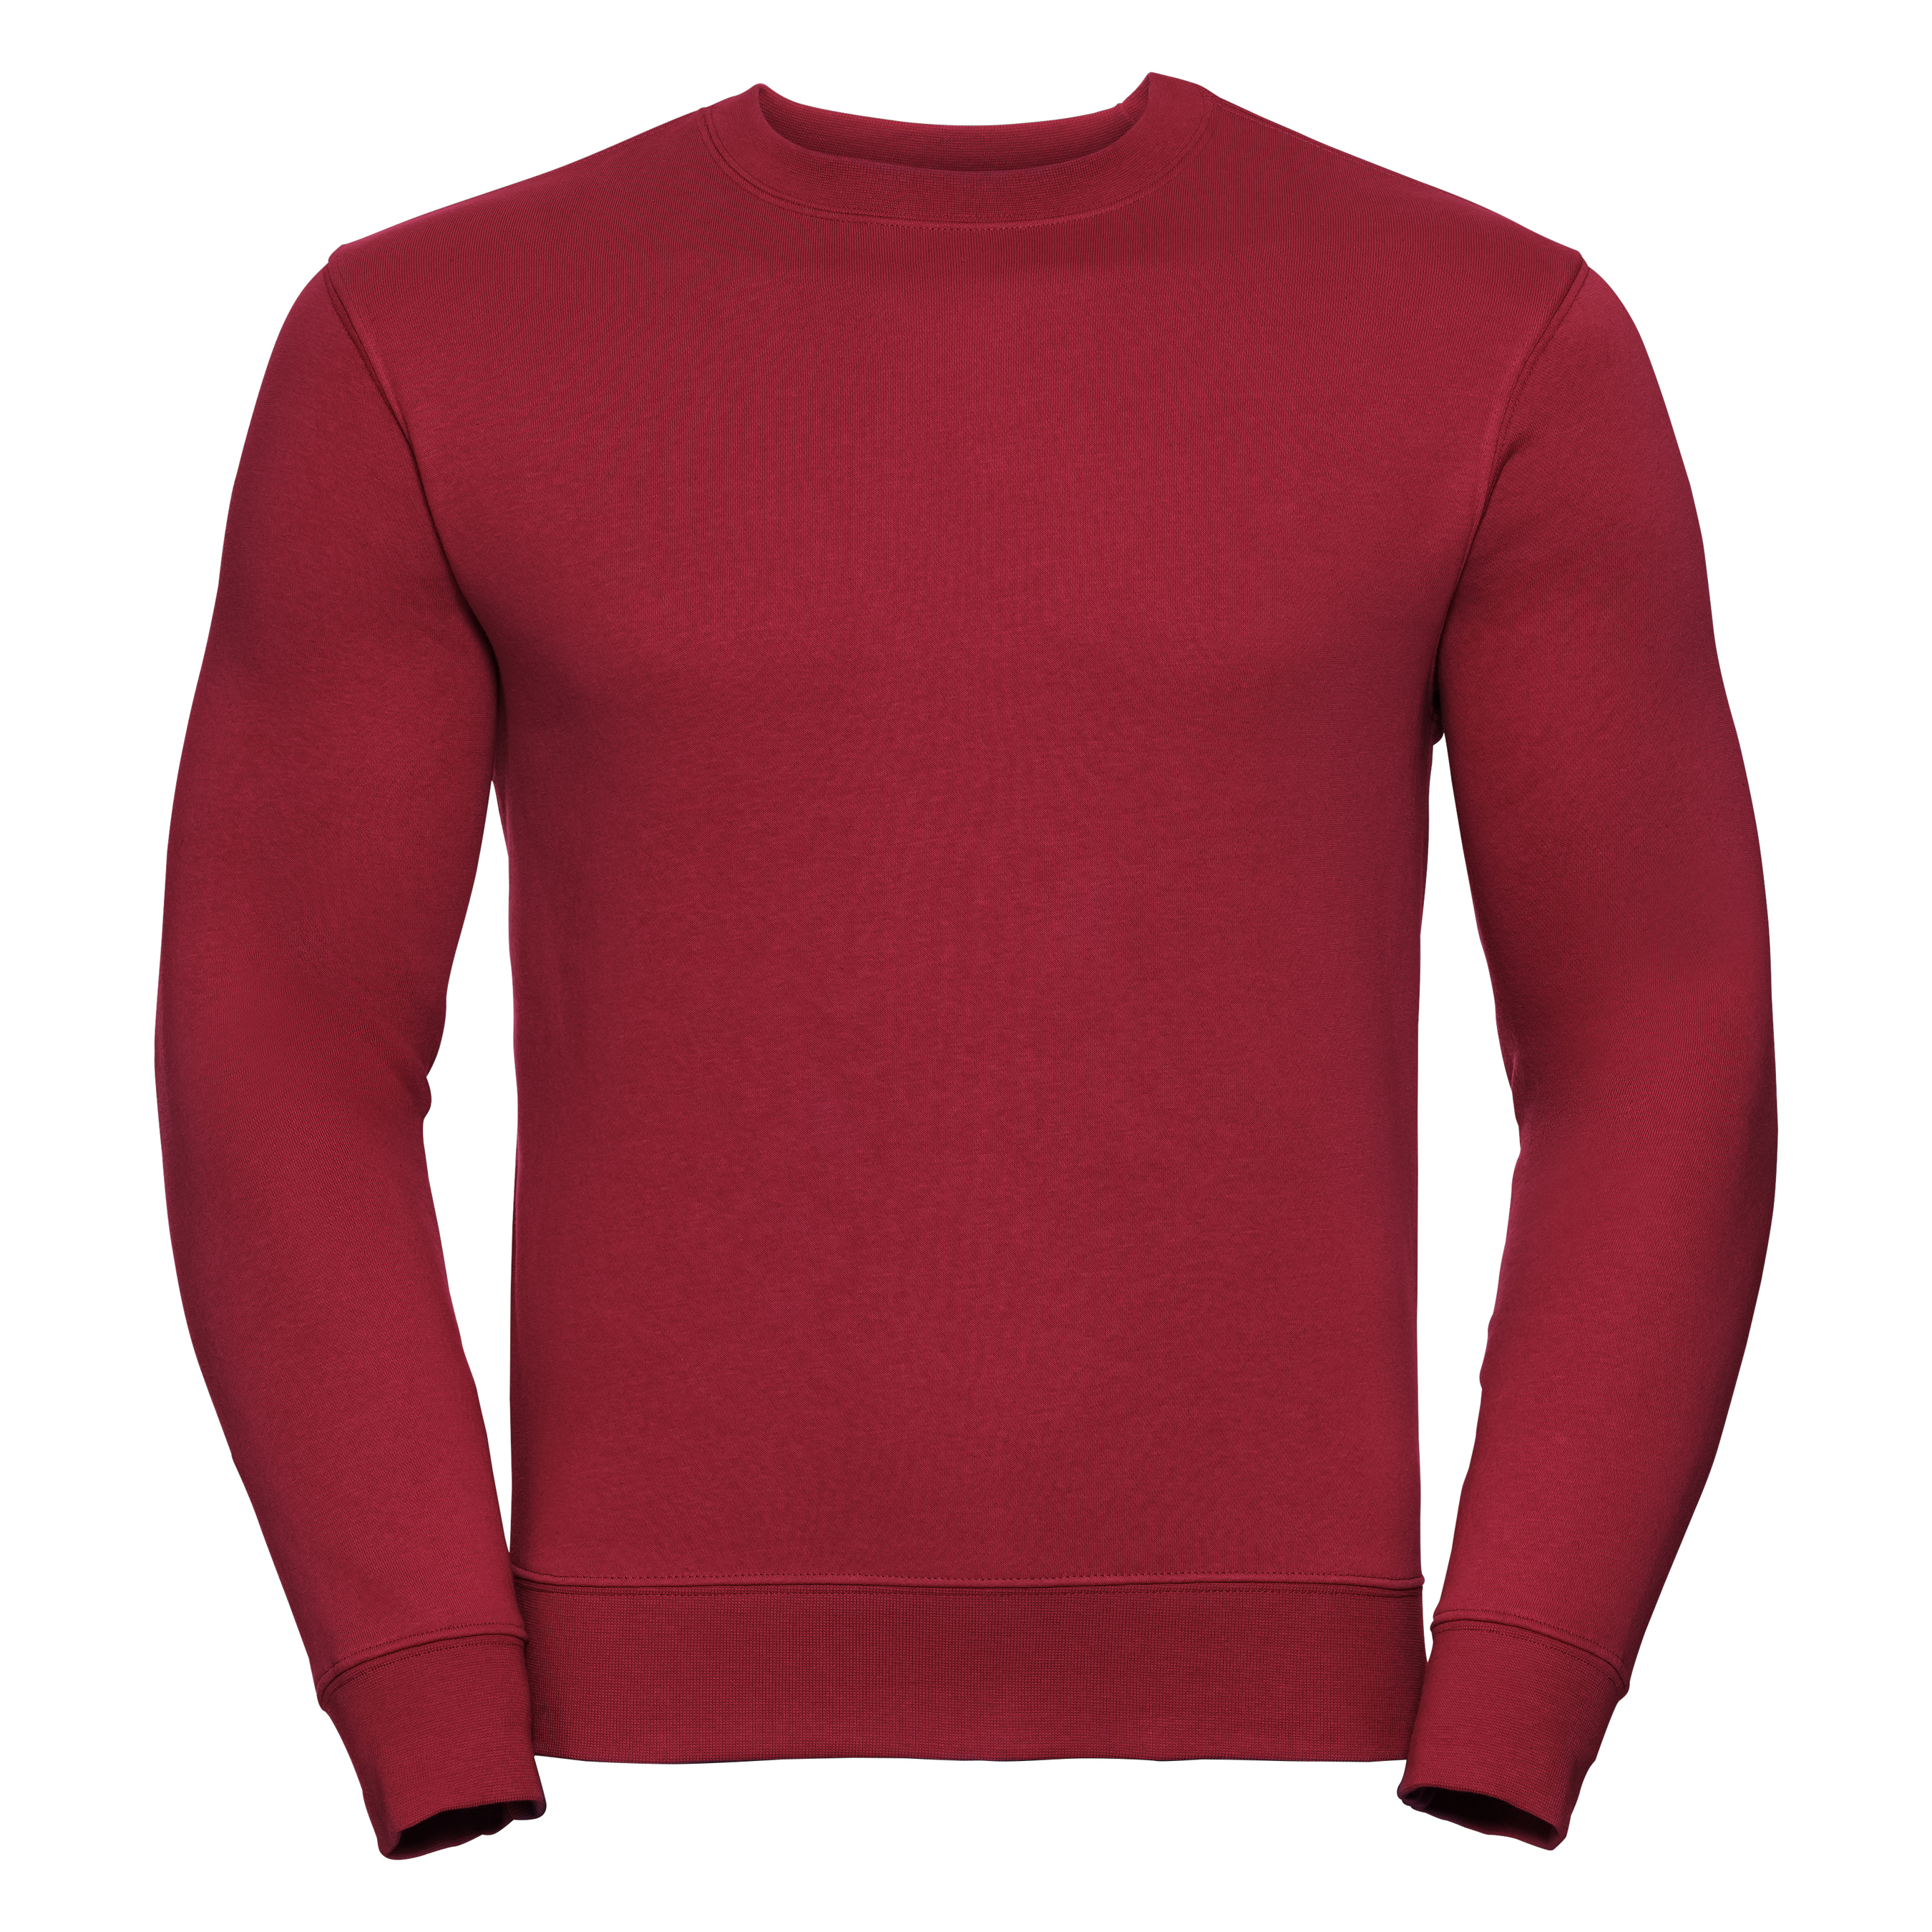 ax-httpswebsystems.s3.amazonaws.comtmp_for_downloadrussell-set-in-sleeve-sweatshirt-classic-red.jpg